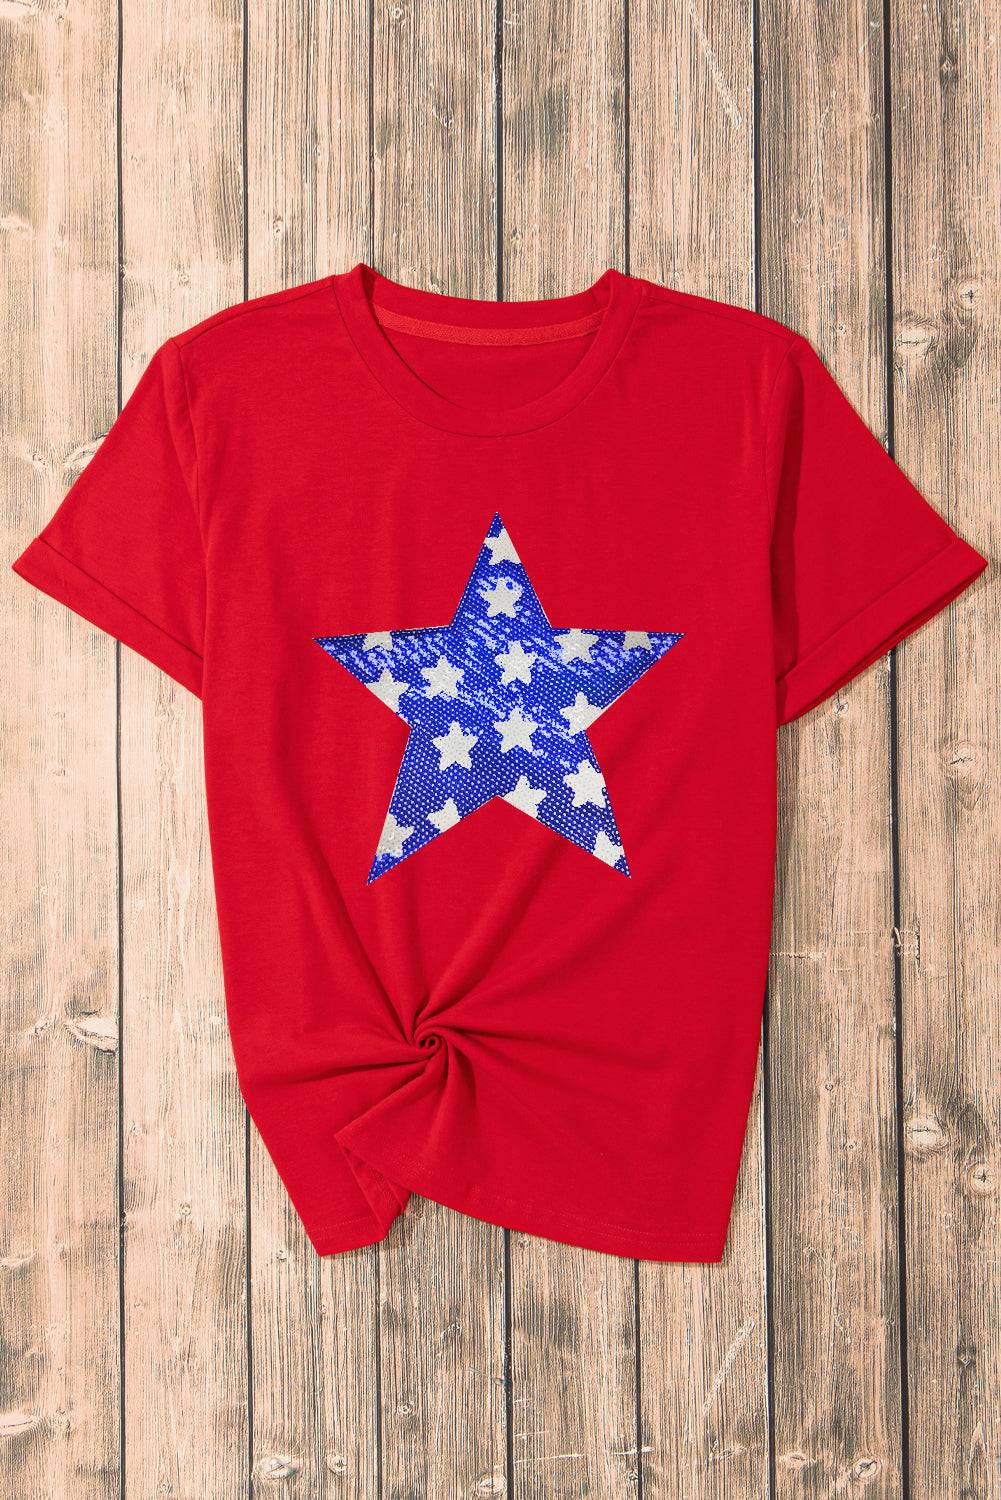 a red shirt with a blue and white star on it